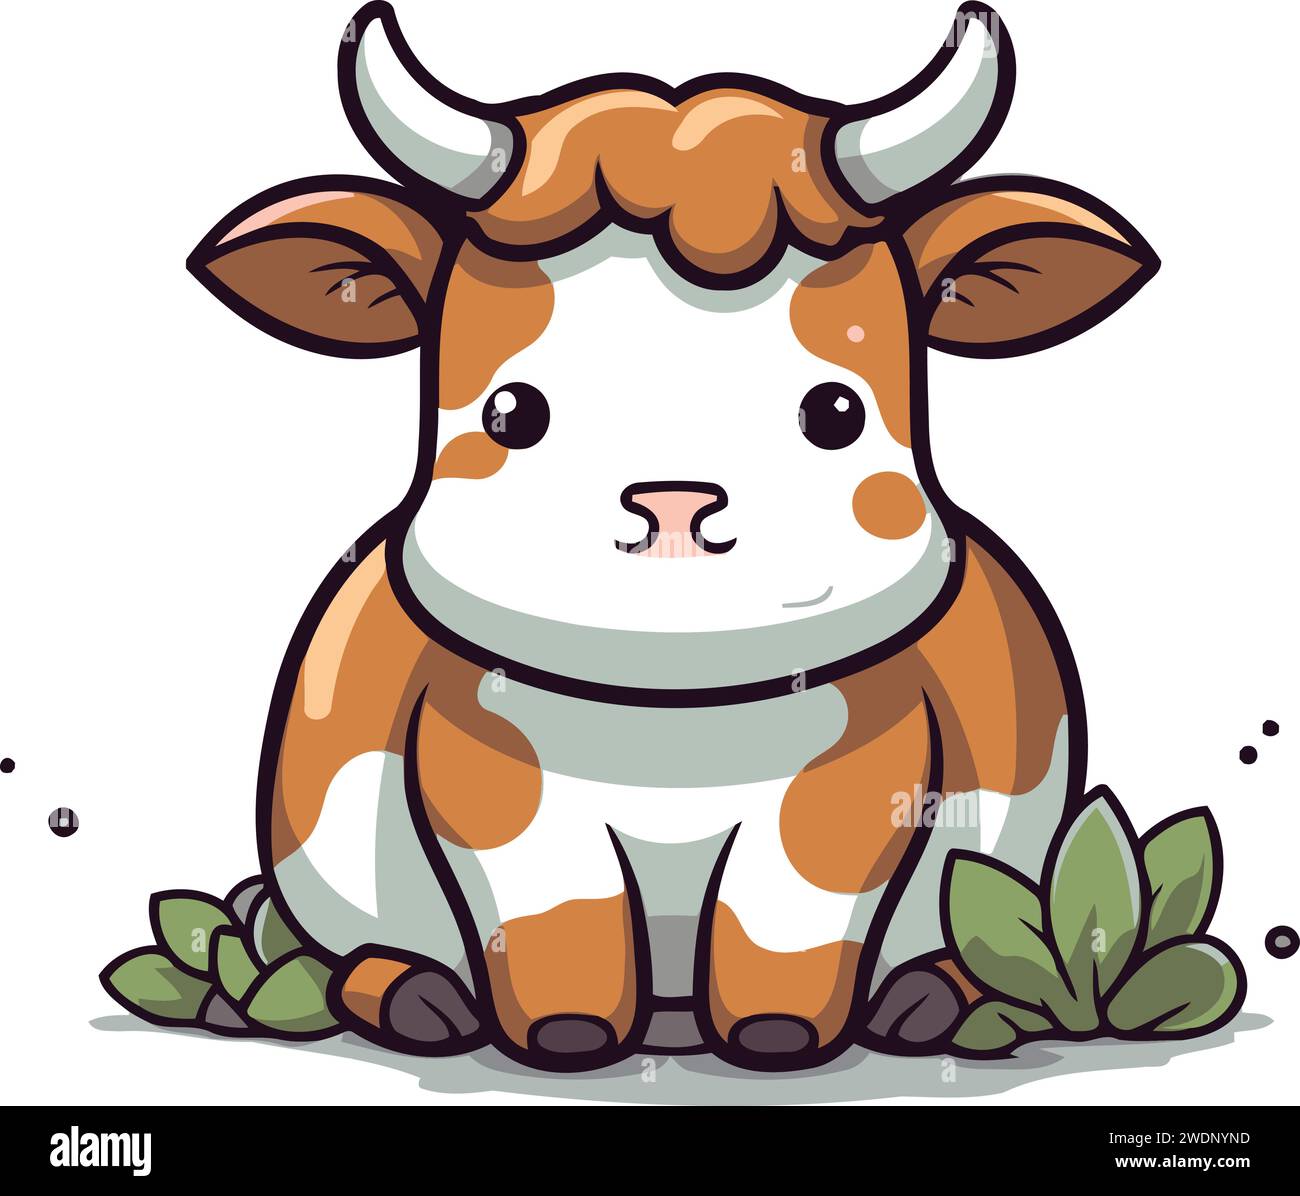 Cute cartoon cow sitting on grass. Vector illustration isolated on white background. Stock Vector